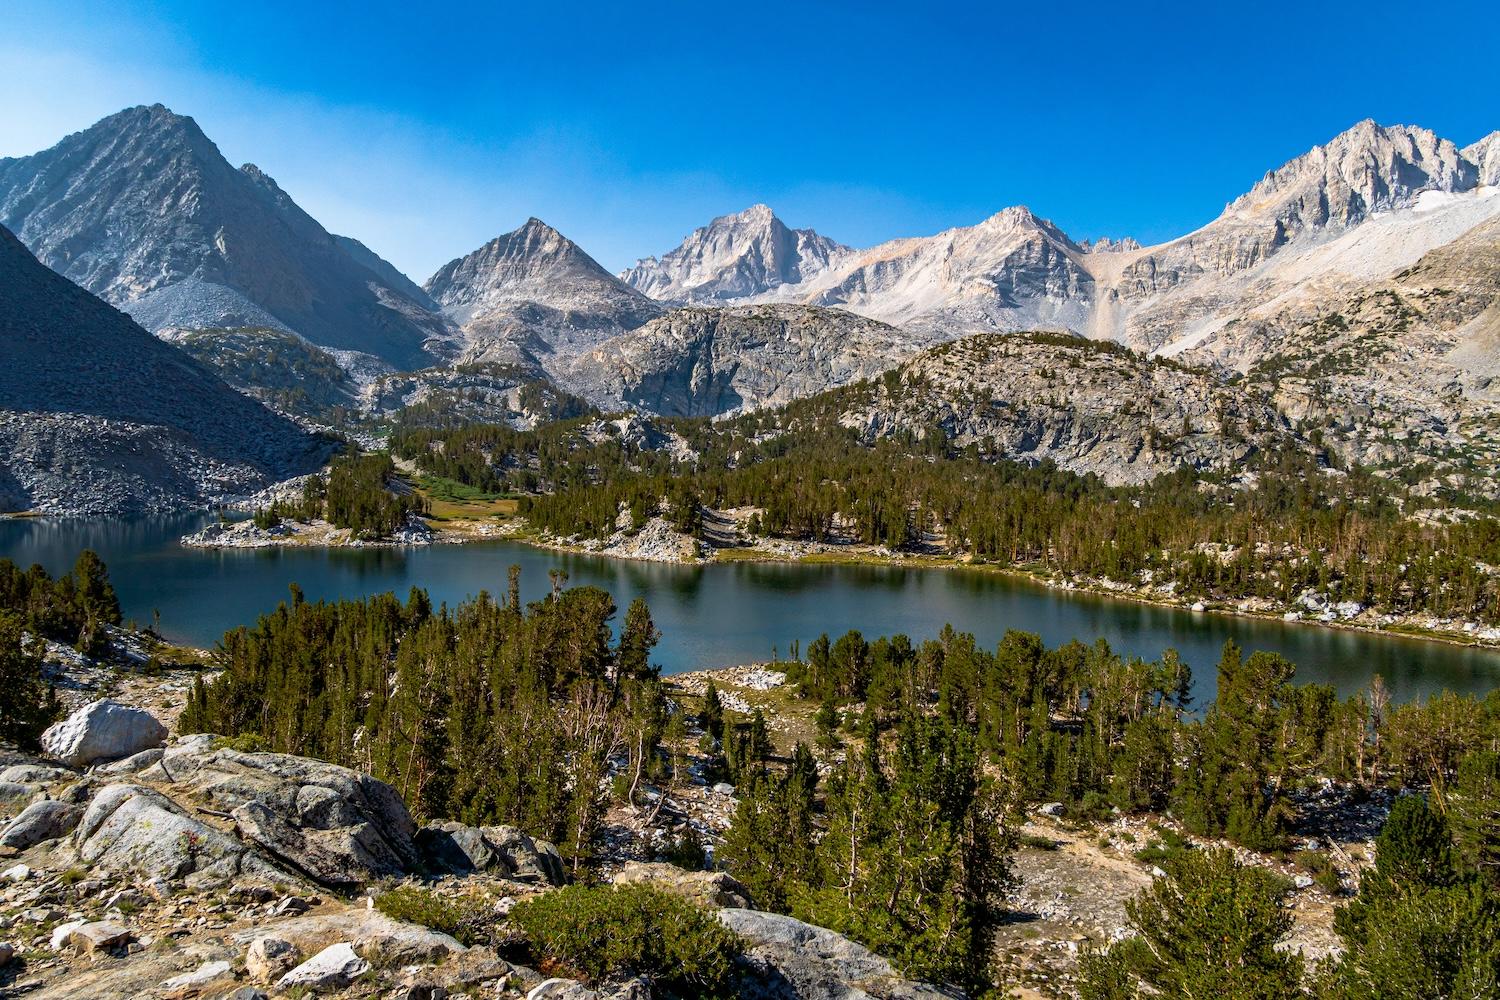 Chickenfoot Lake in The Little Lakes Valley of the Sierras. Photo by Brock Dallman